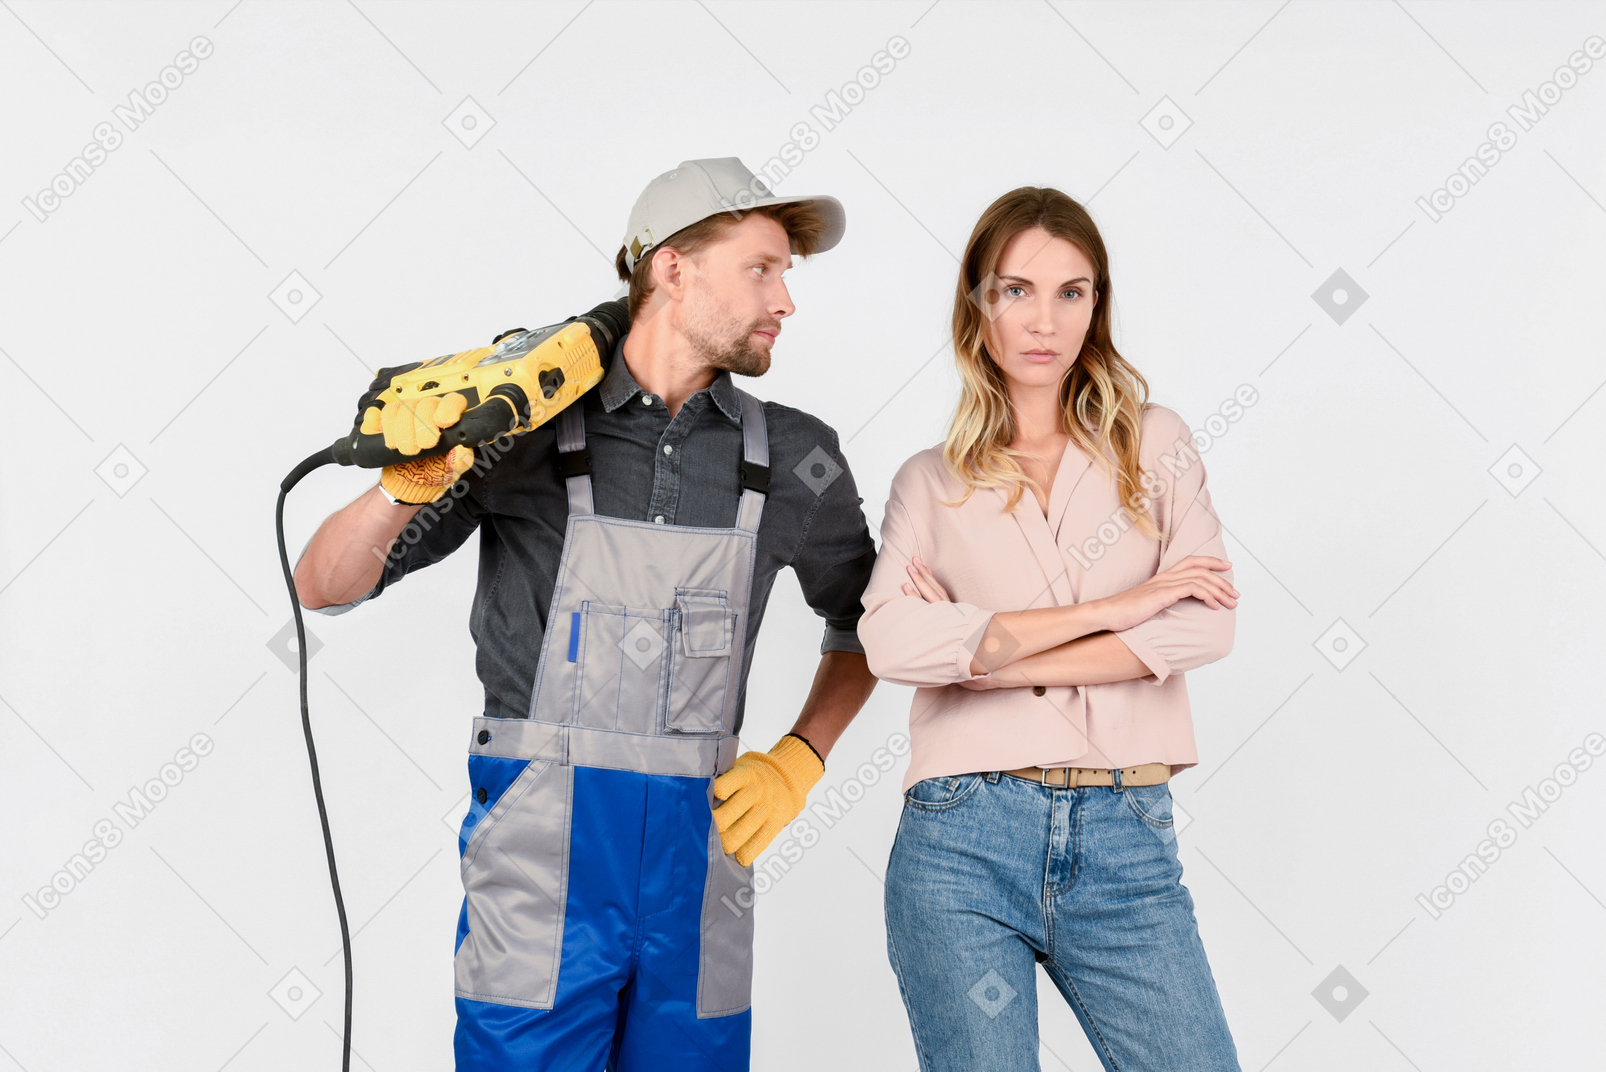 Don't worry, i'll fix all that